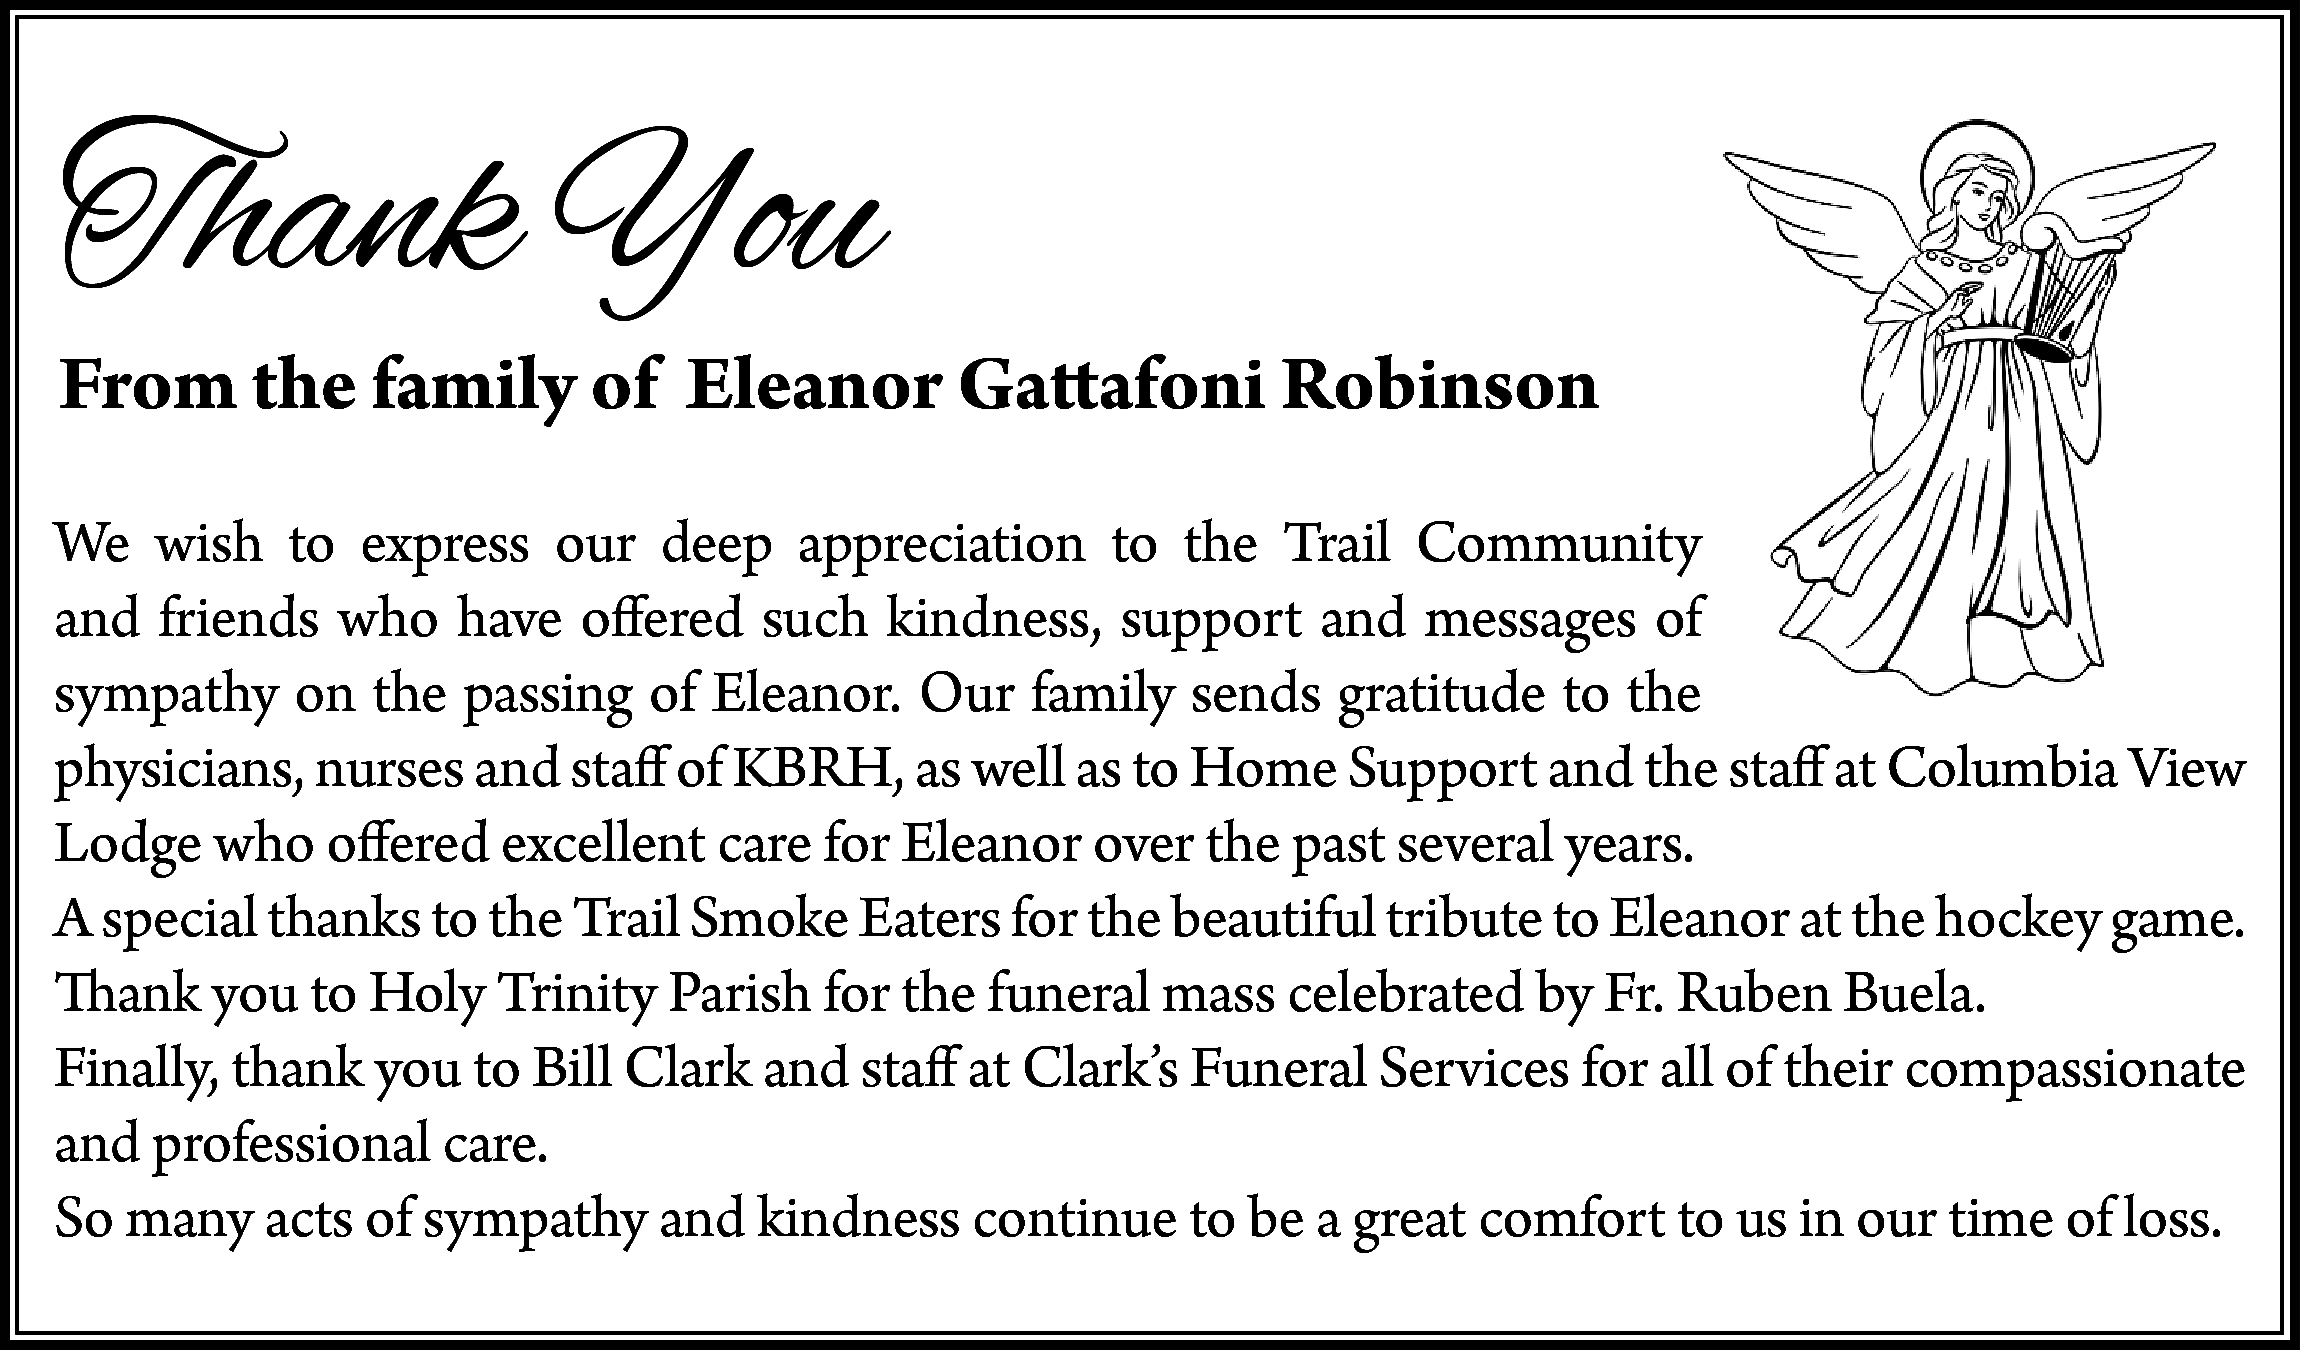 Thank You <br> <br>From the  Thank You    From the family of Eleanor Gattafoni Robinson  We wish to express our deep appreciation to the Trail Community  and friends who have offered such kindness, support and messages of  sympathy on the passing of Eleanor. Our family sends gratitude to the  physicians, nurses and staff of KBRH, as well as to Home Support and the staff at Columbia View  Lodge who offered excellent care for Eleanor over the past several years.  A special thanks to the Trail Smoke Eaters for the beautiful tribute to Eleanor at the hockey game.  Thank you to Holy Trinity Parish for the funeral mass celebrated by Fr. Ruben Buela.  Finally, thank you to Bill Clark and staff at Clark’s Funeral Services for all of their compassionate  and professional care.  So many acts of sympathy and kindness continue to be a great comfort to us in our time of loss.    